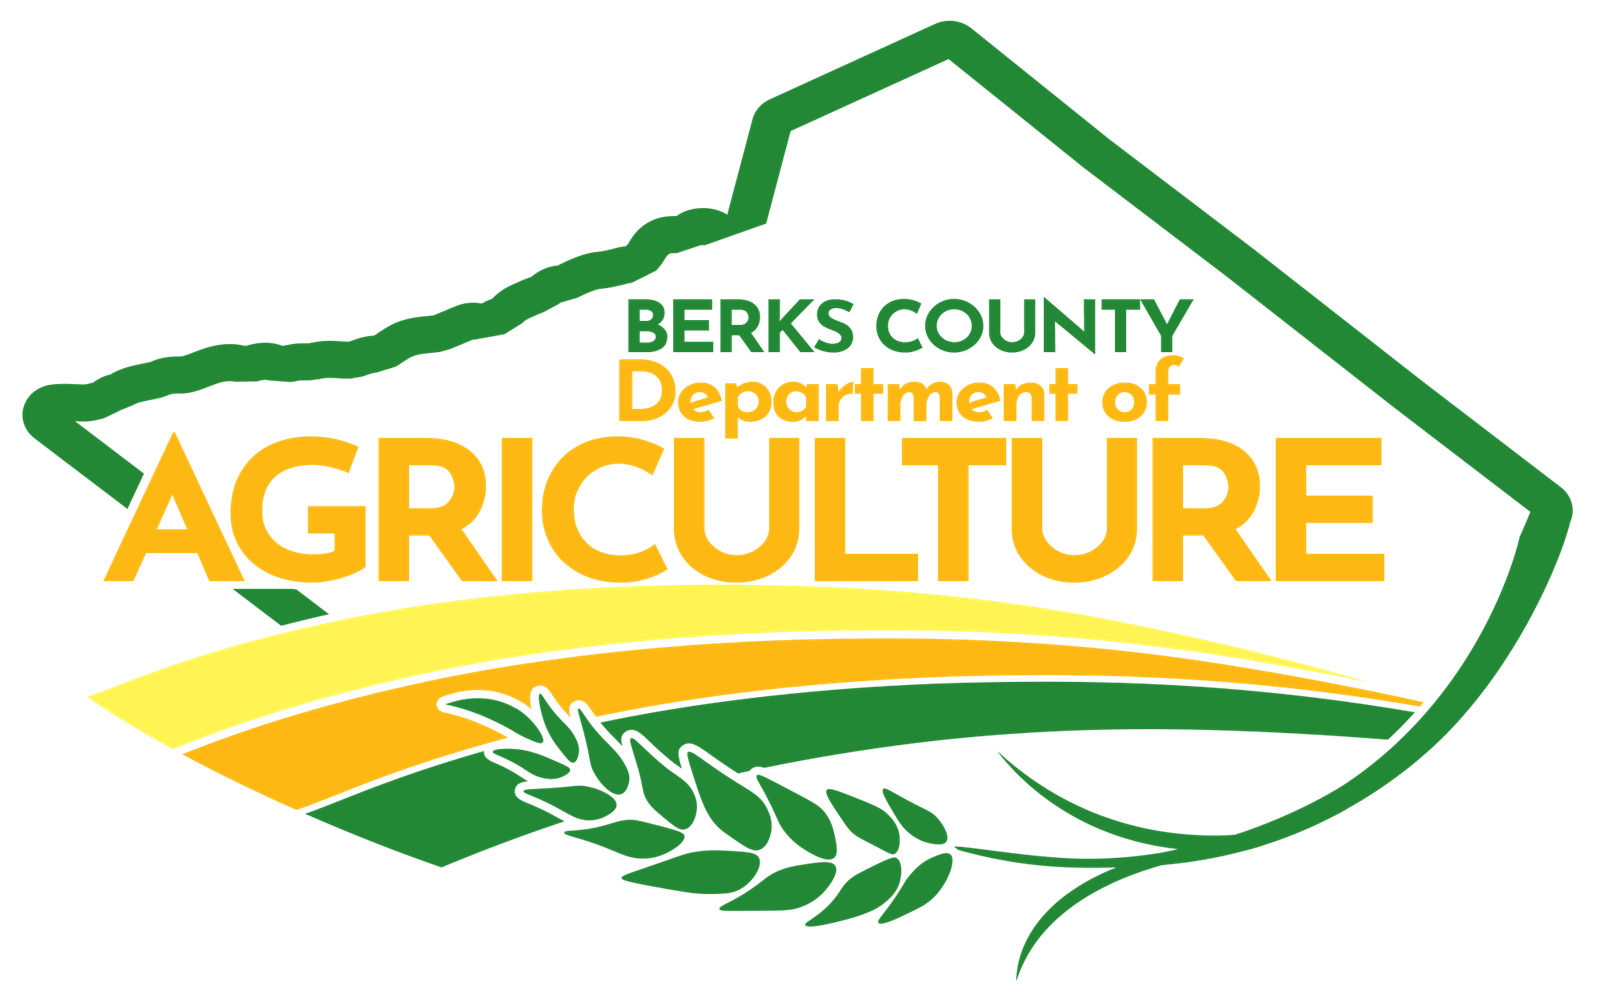 Berks County Dept. of Agriculture Seal